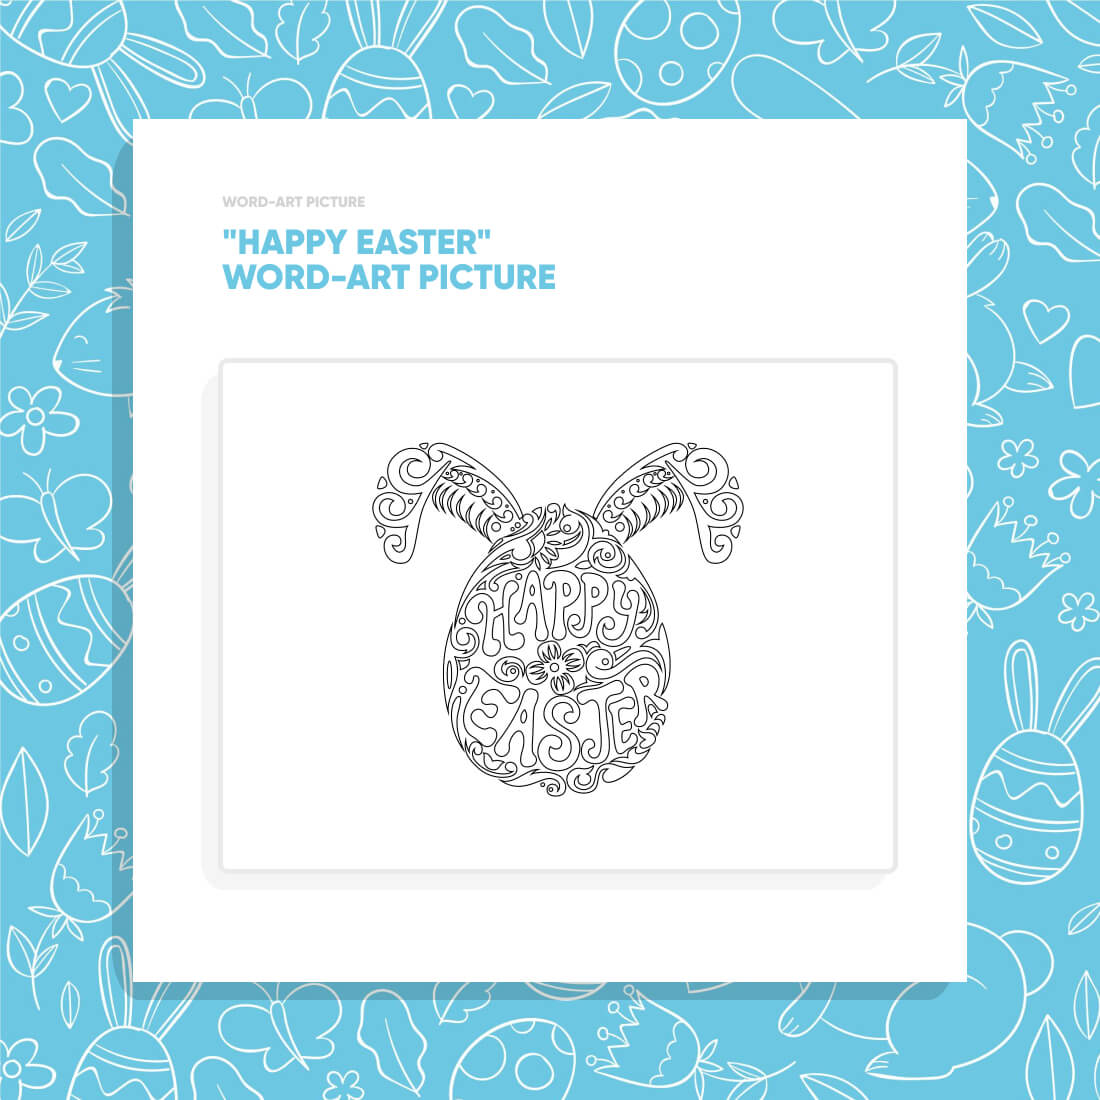 "Happy Easter" Word Art Picture cover image.